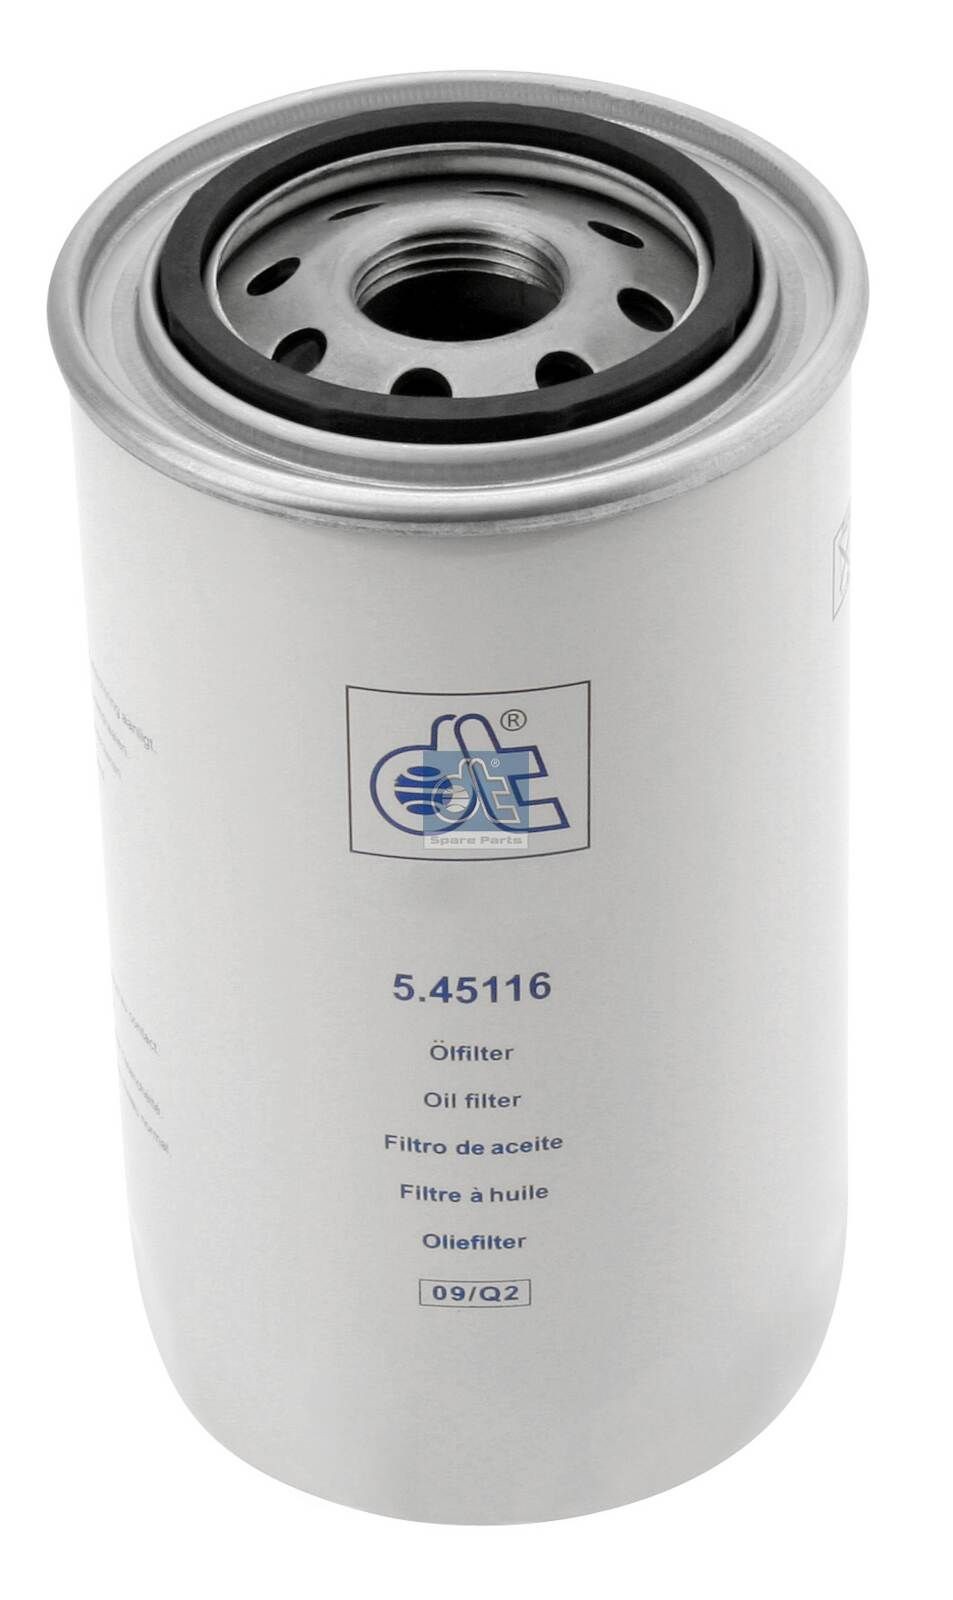 H19W10 DT Spare Parts 5.45116 Oil filter 50 21 192 695